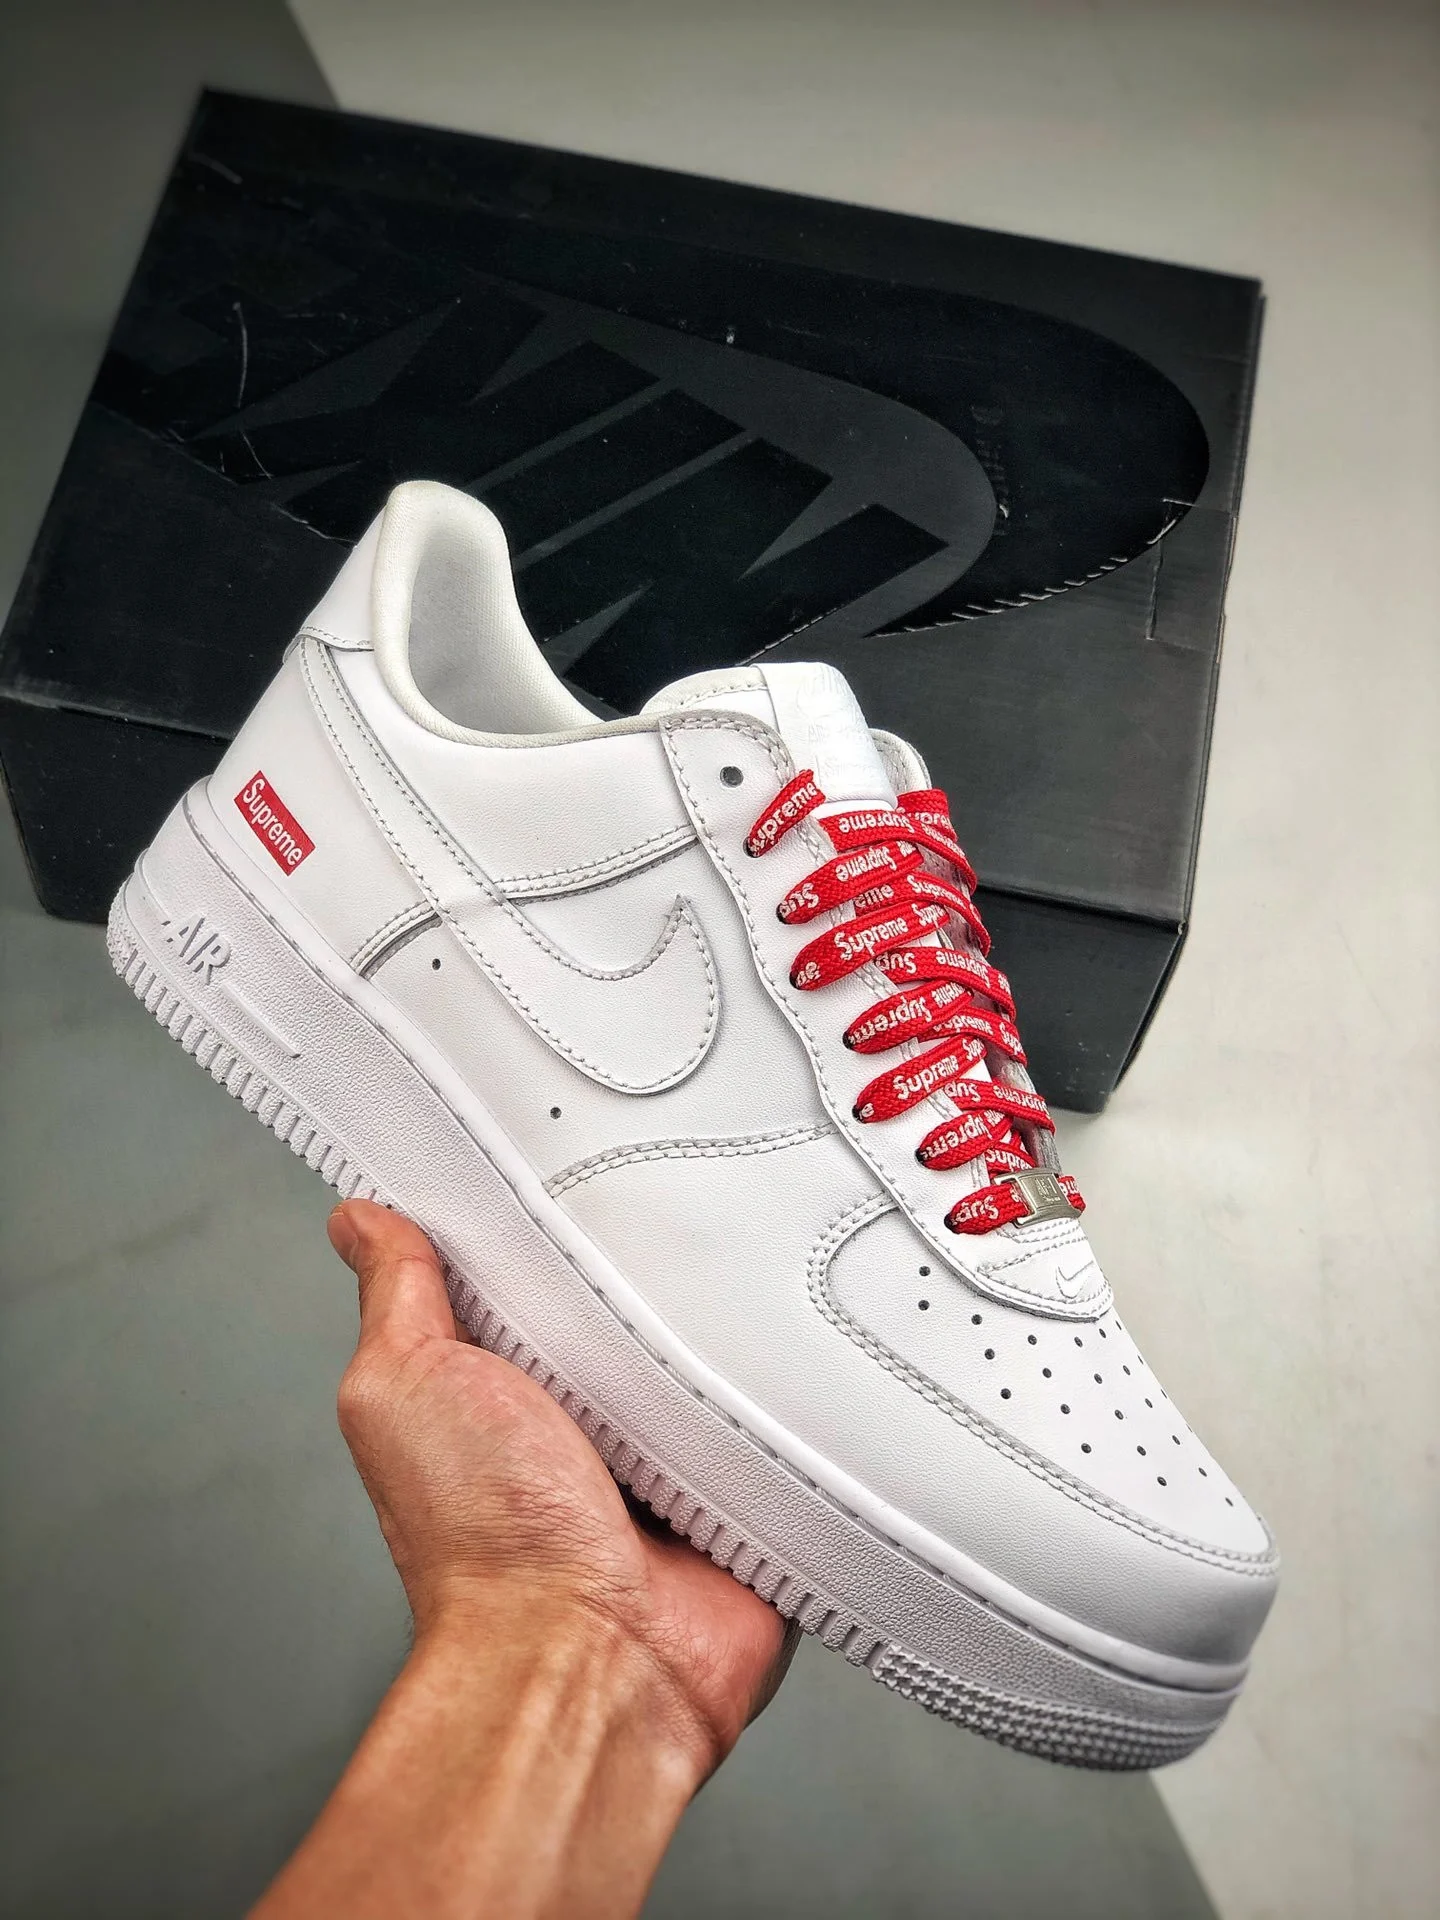 Supreme x Nike Air Force 1 Low White CU9225-100 For Sale